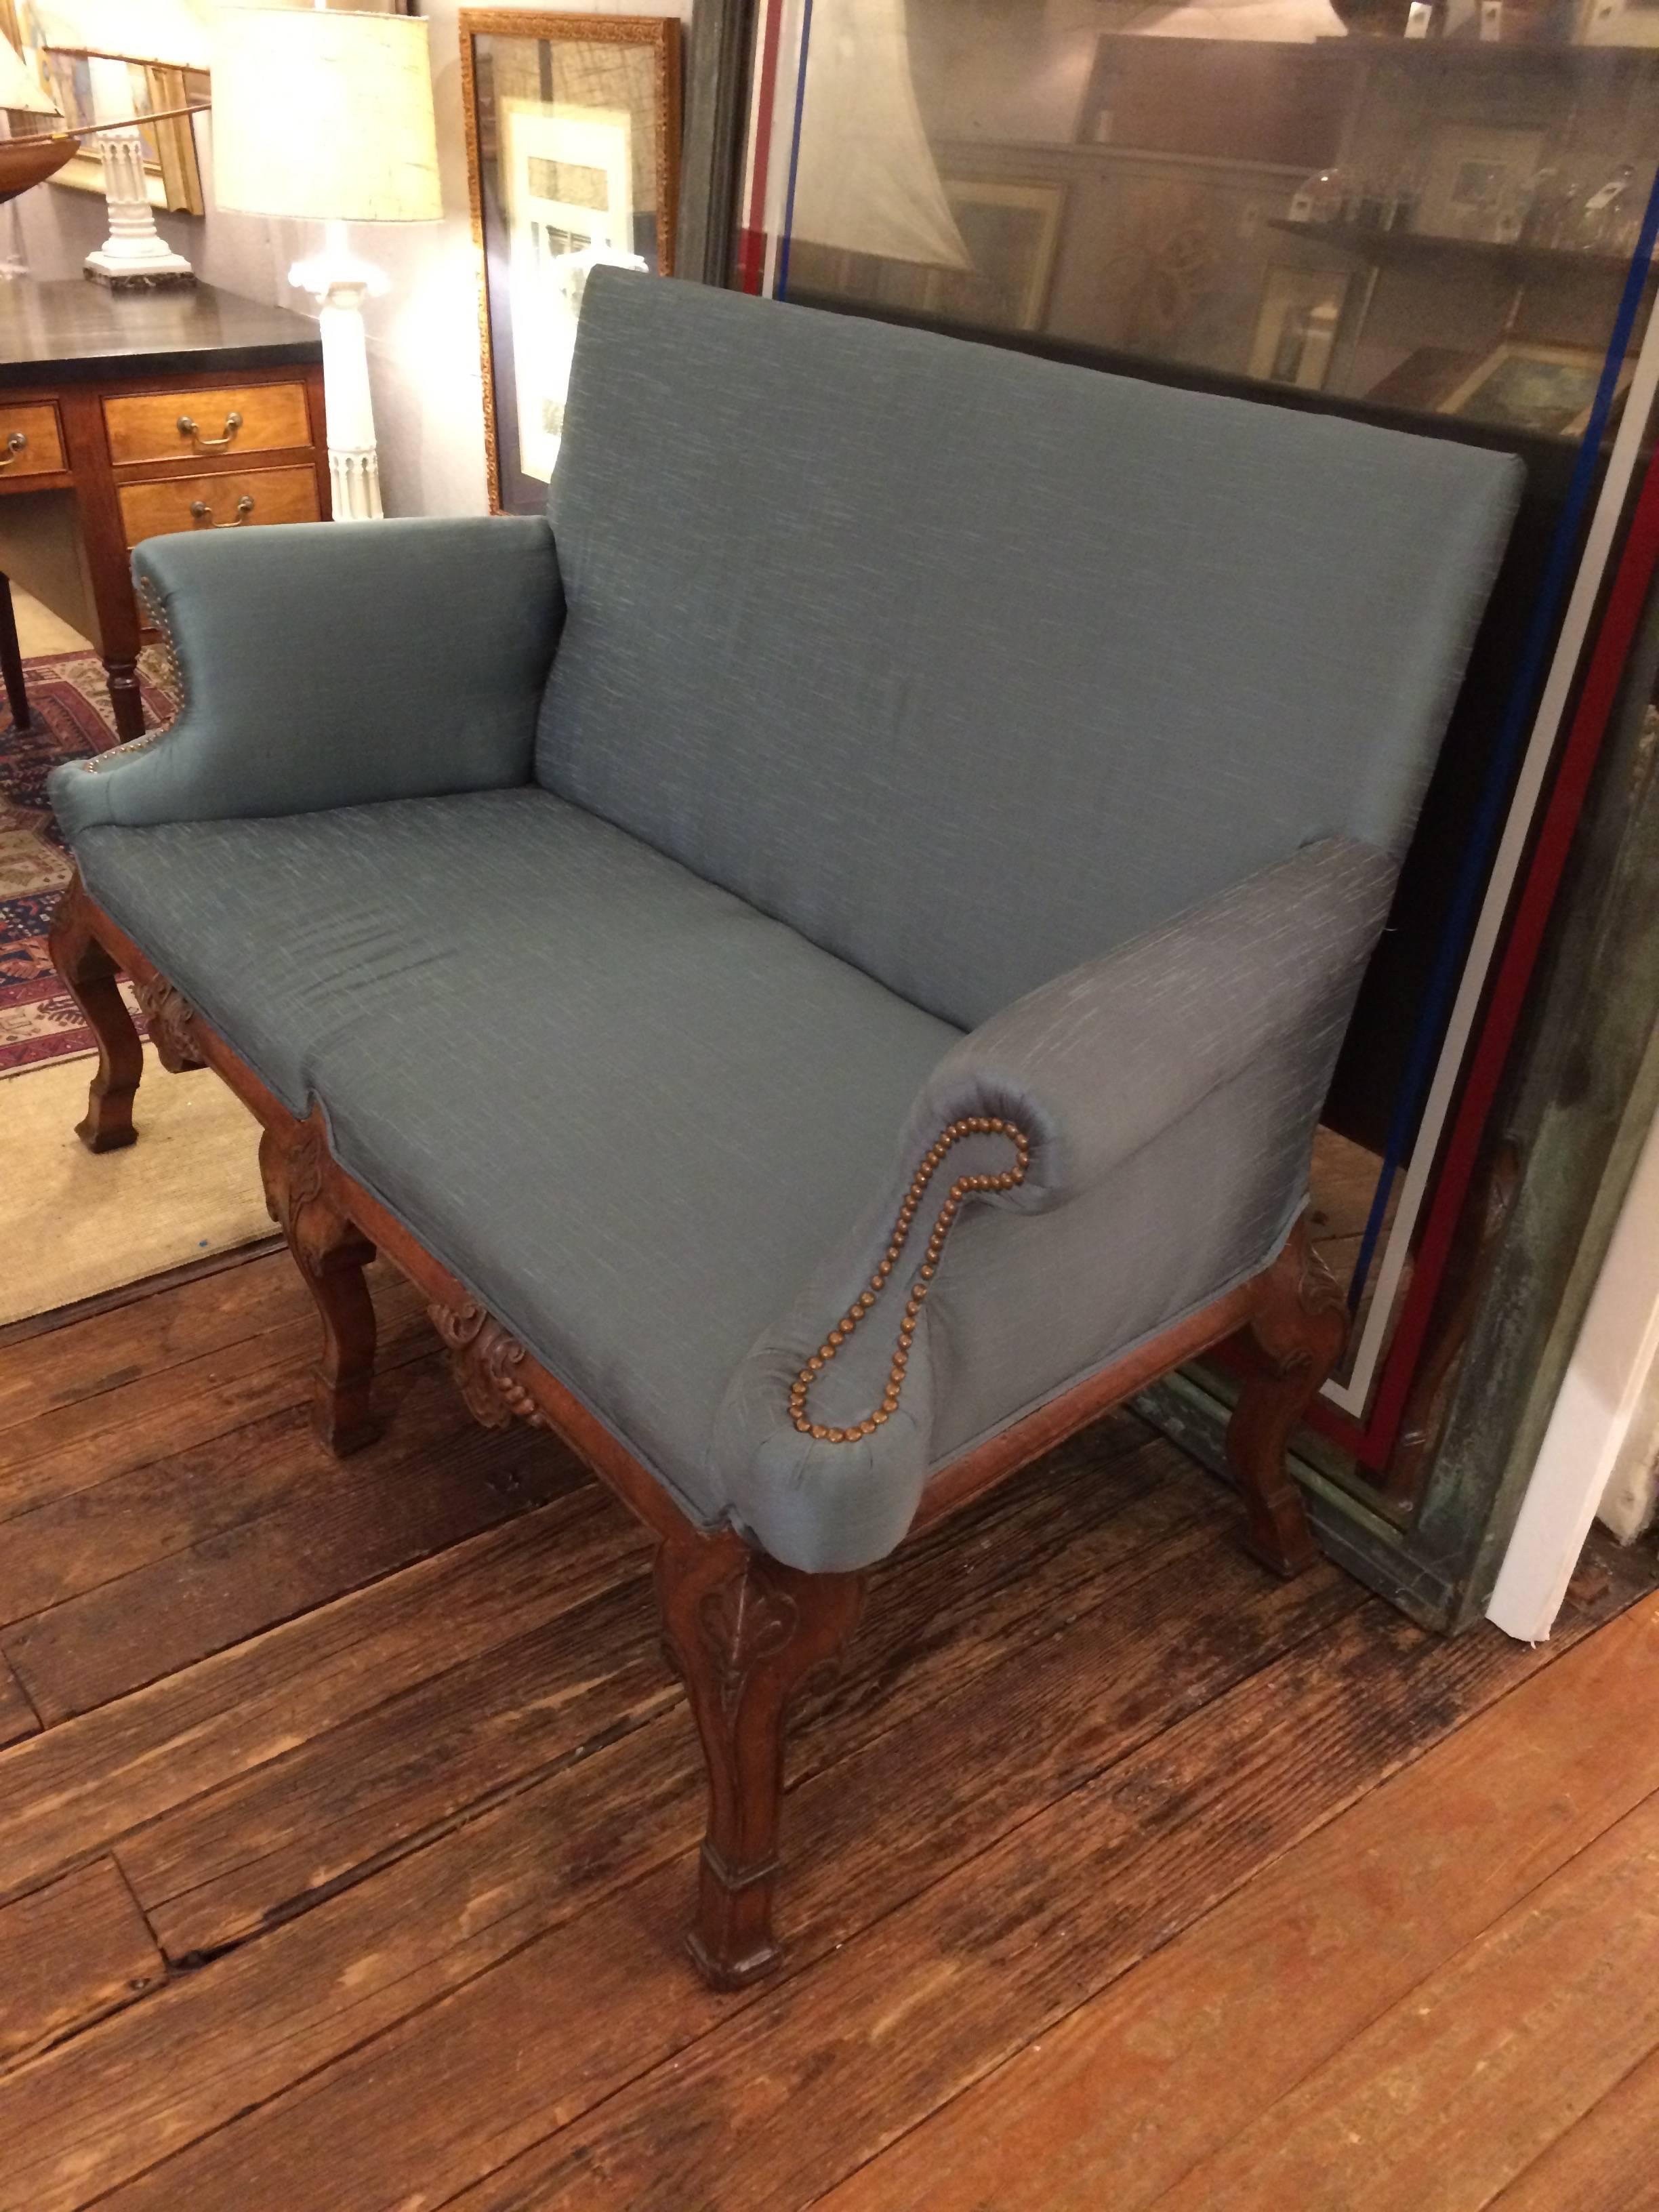 Beautiful carved wood antique loveseat having cabriole legs, acanthus leaf adornment, and blue natural silk upholstery.
Measure: Arm height 28.